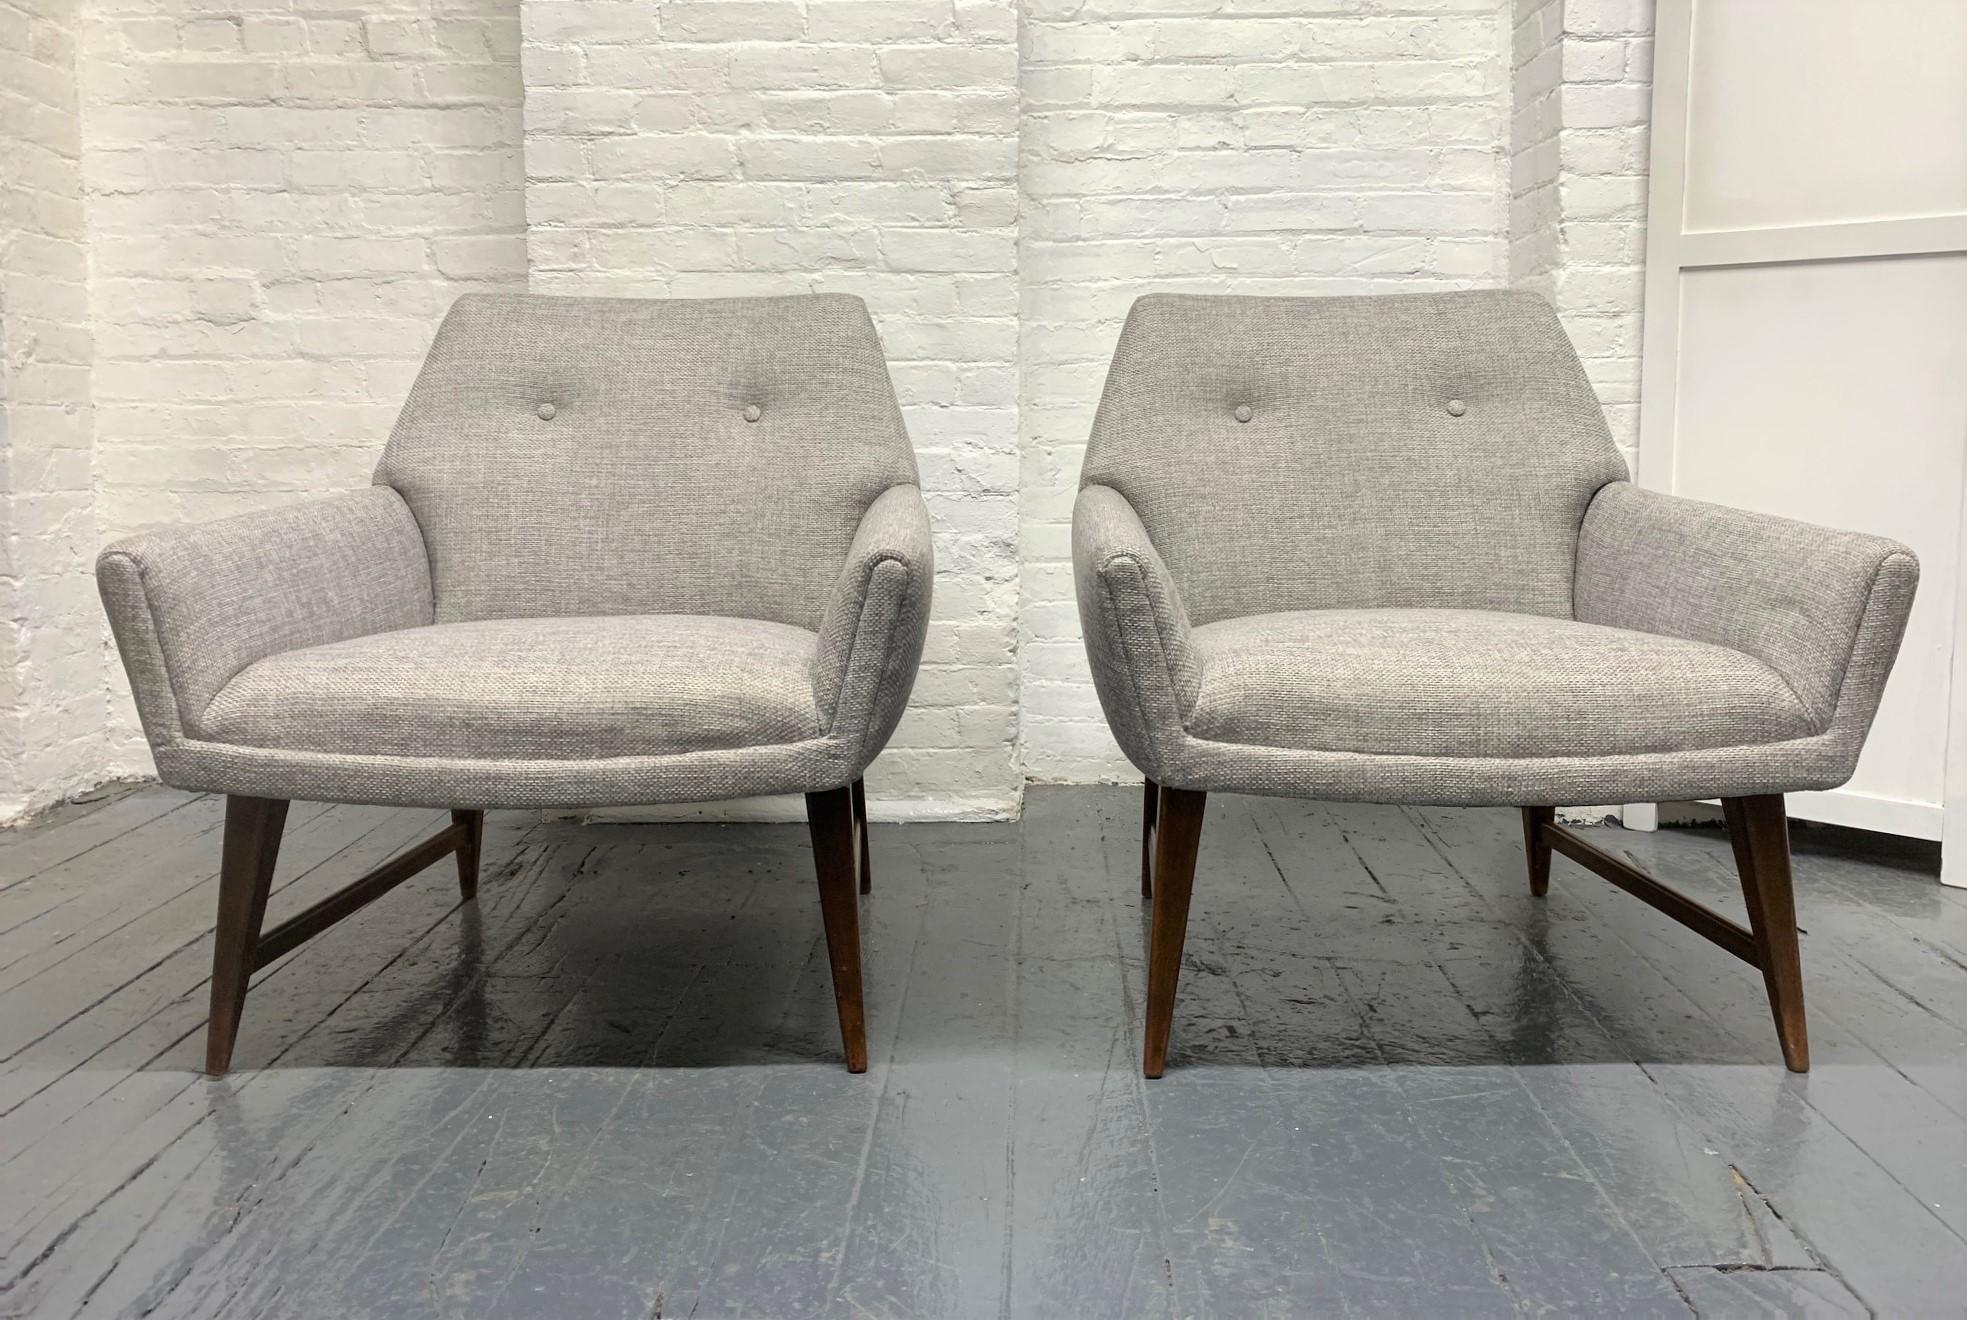 Pair of lounge chairs style of Raphael. Has solid walnut legs and newly reupholstered.